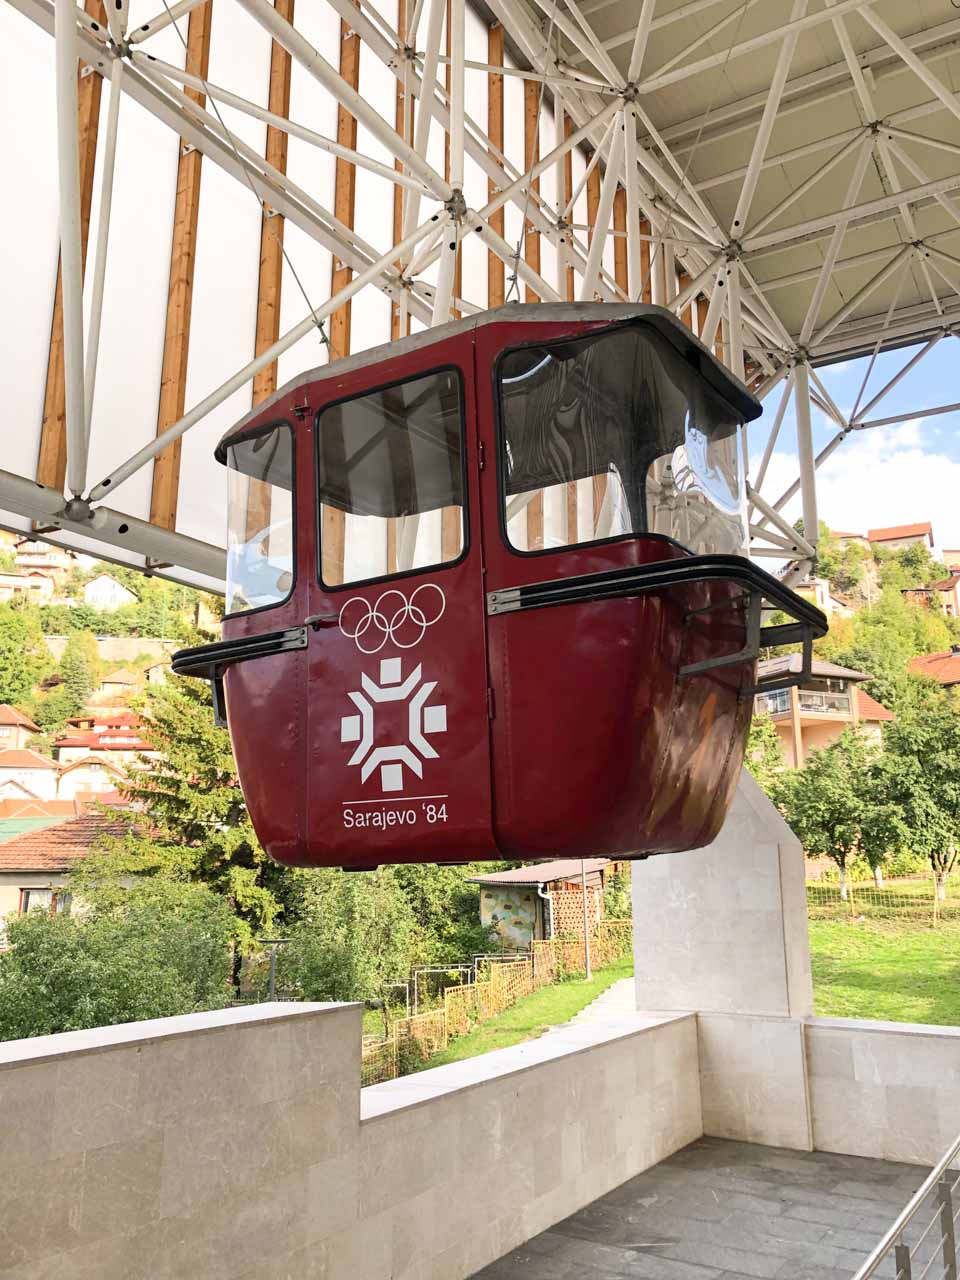 An old red cable car commemorating the 1984 Winter Olympics held in Sarajevo